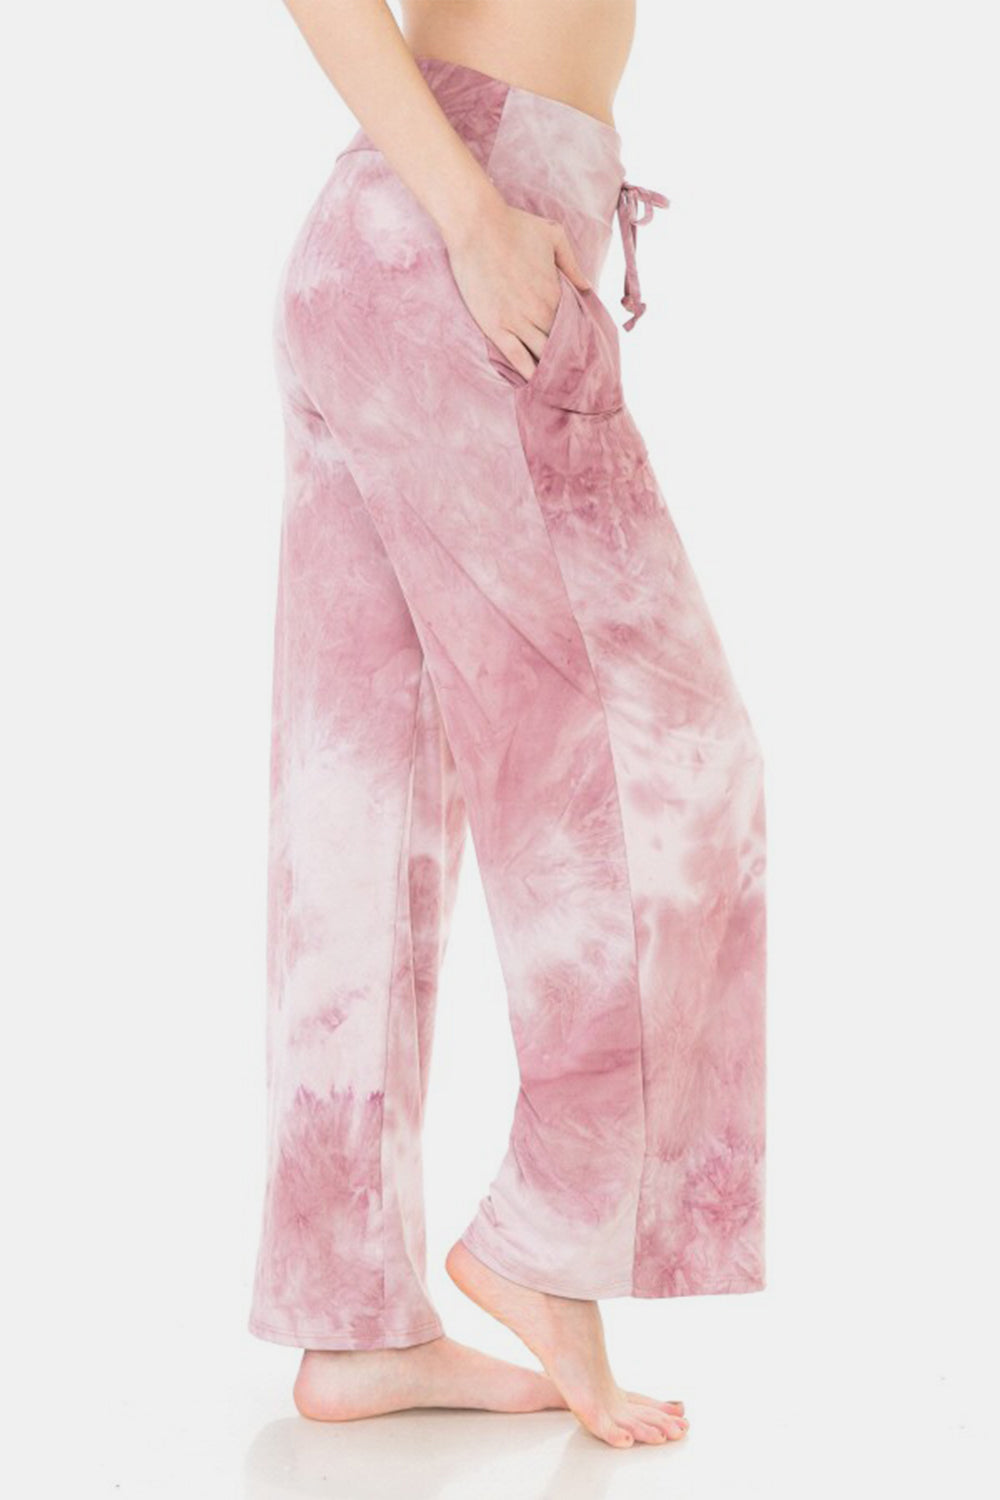 Misty Rose Leggings Depot Buttery Soft Printed Drawstring Pants Sentient Beauty Fashions Apparel & Accessories